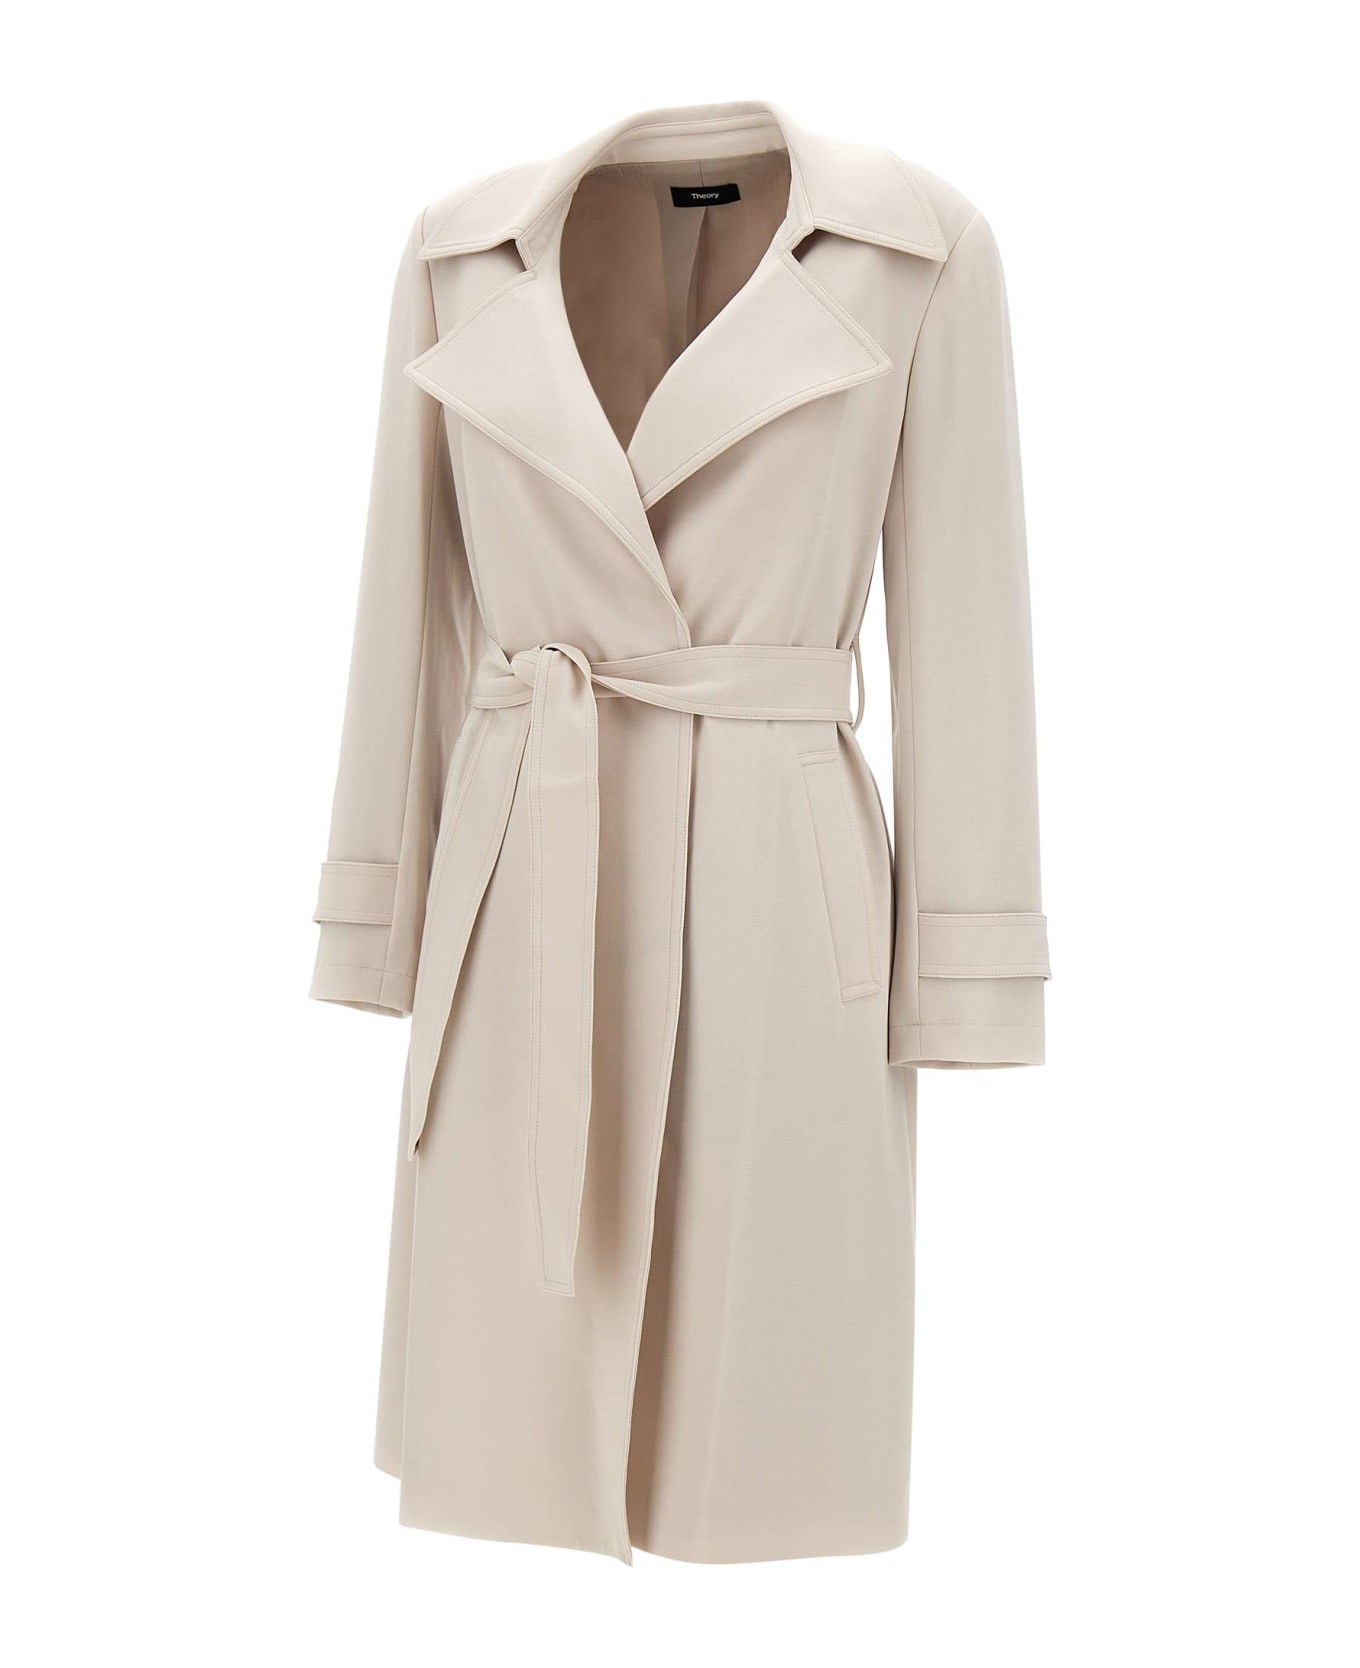 Theory "oaklane" Trench - BEIGE